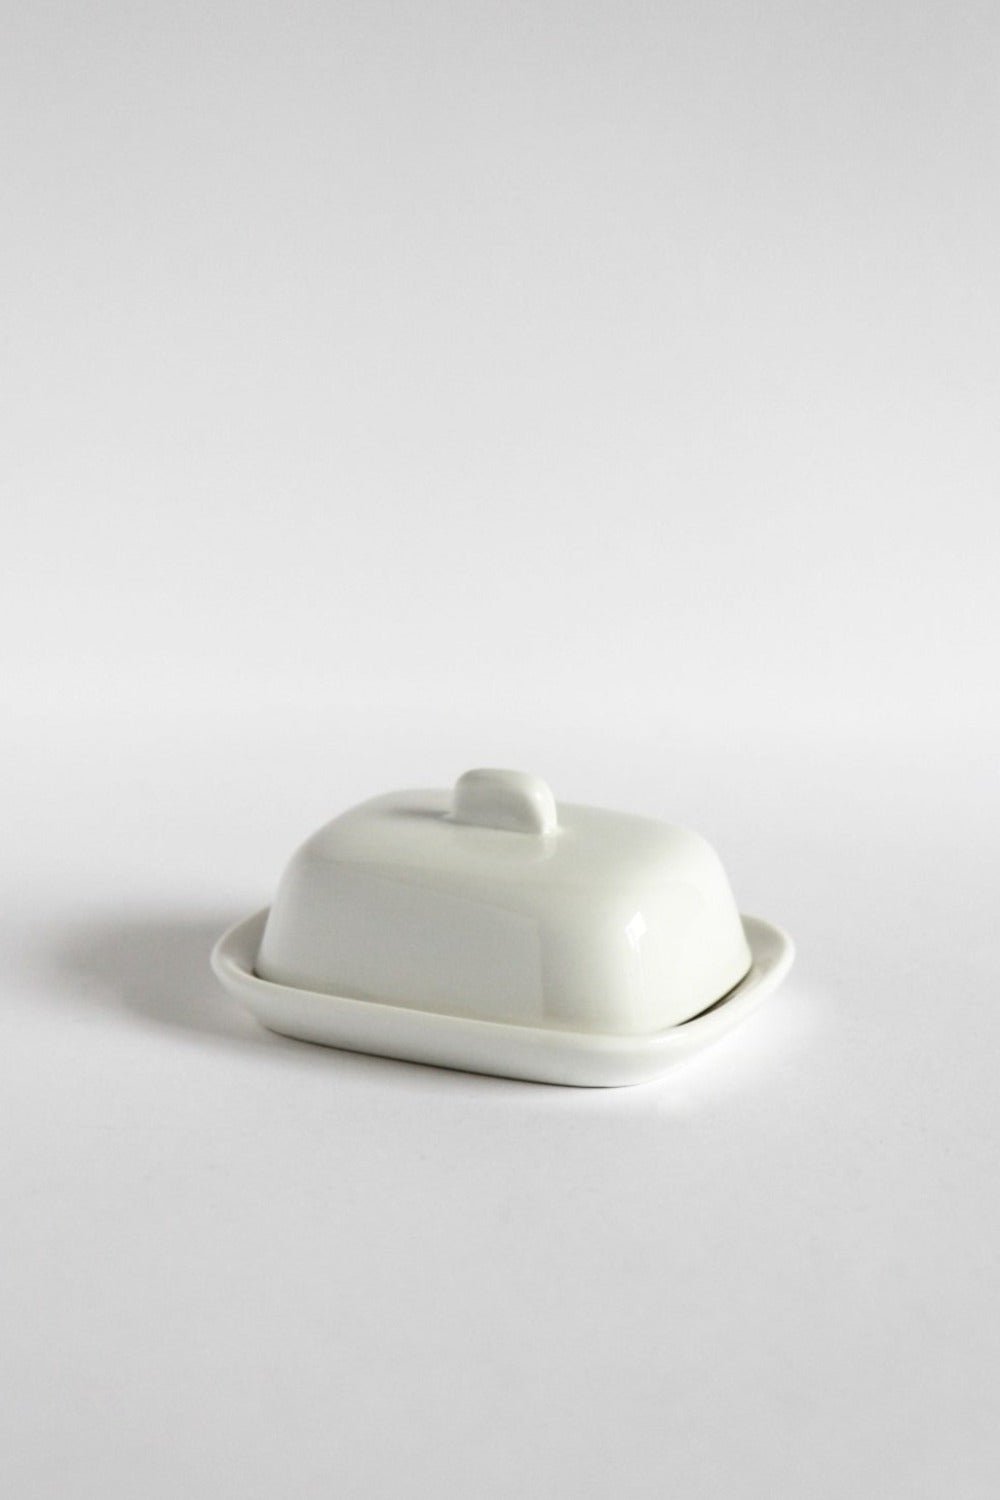 Mini Butter Dish with Lid